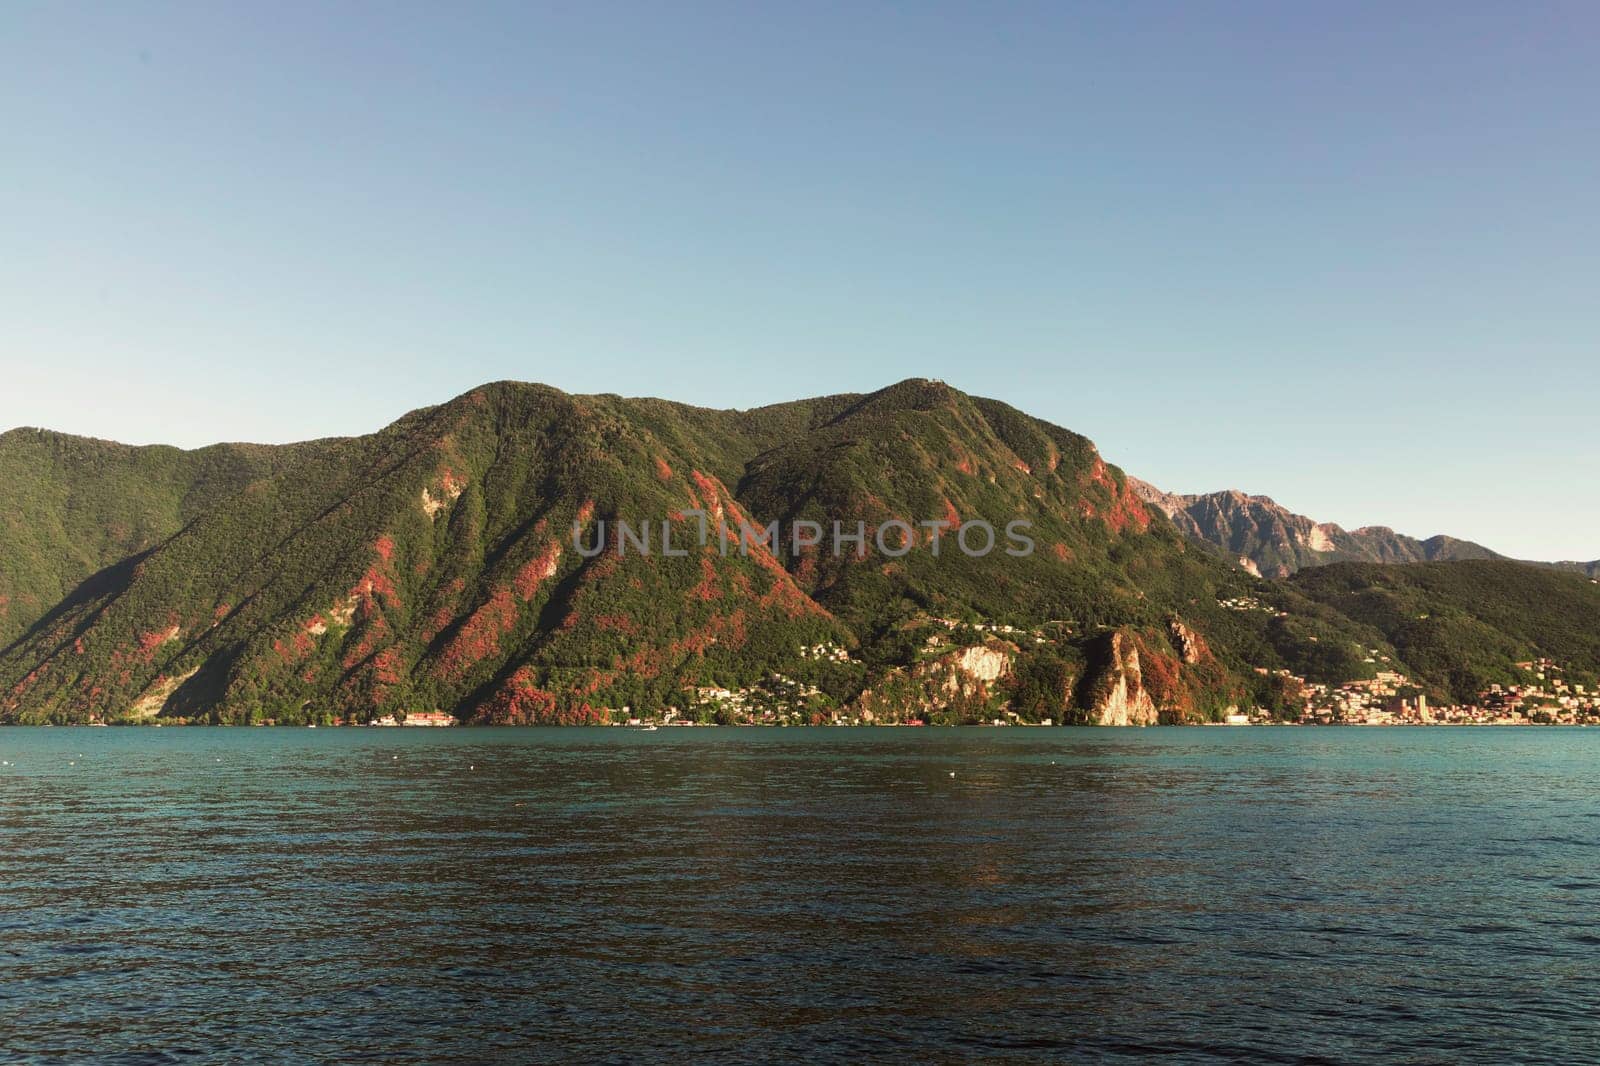 Lakeside Serenity with Red Foliaged Hills. High quality photo